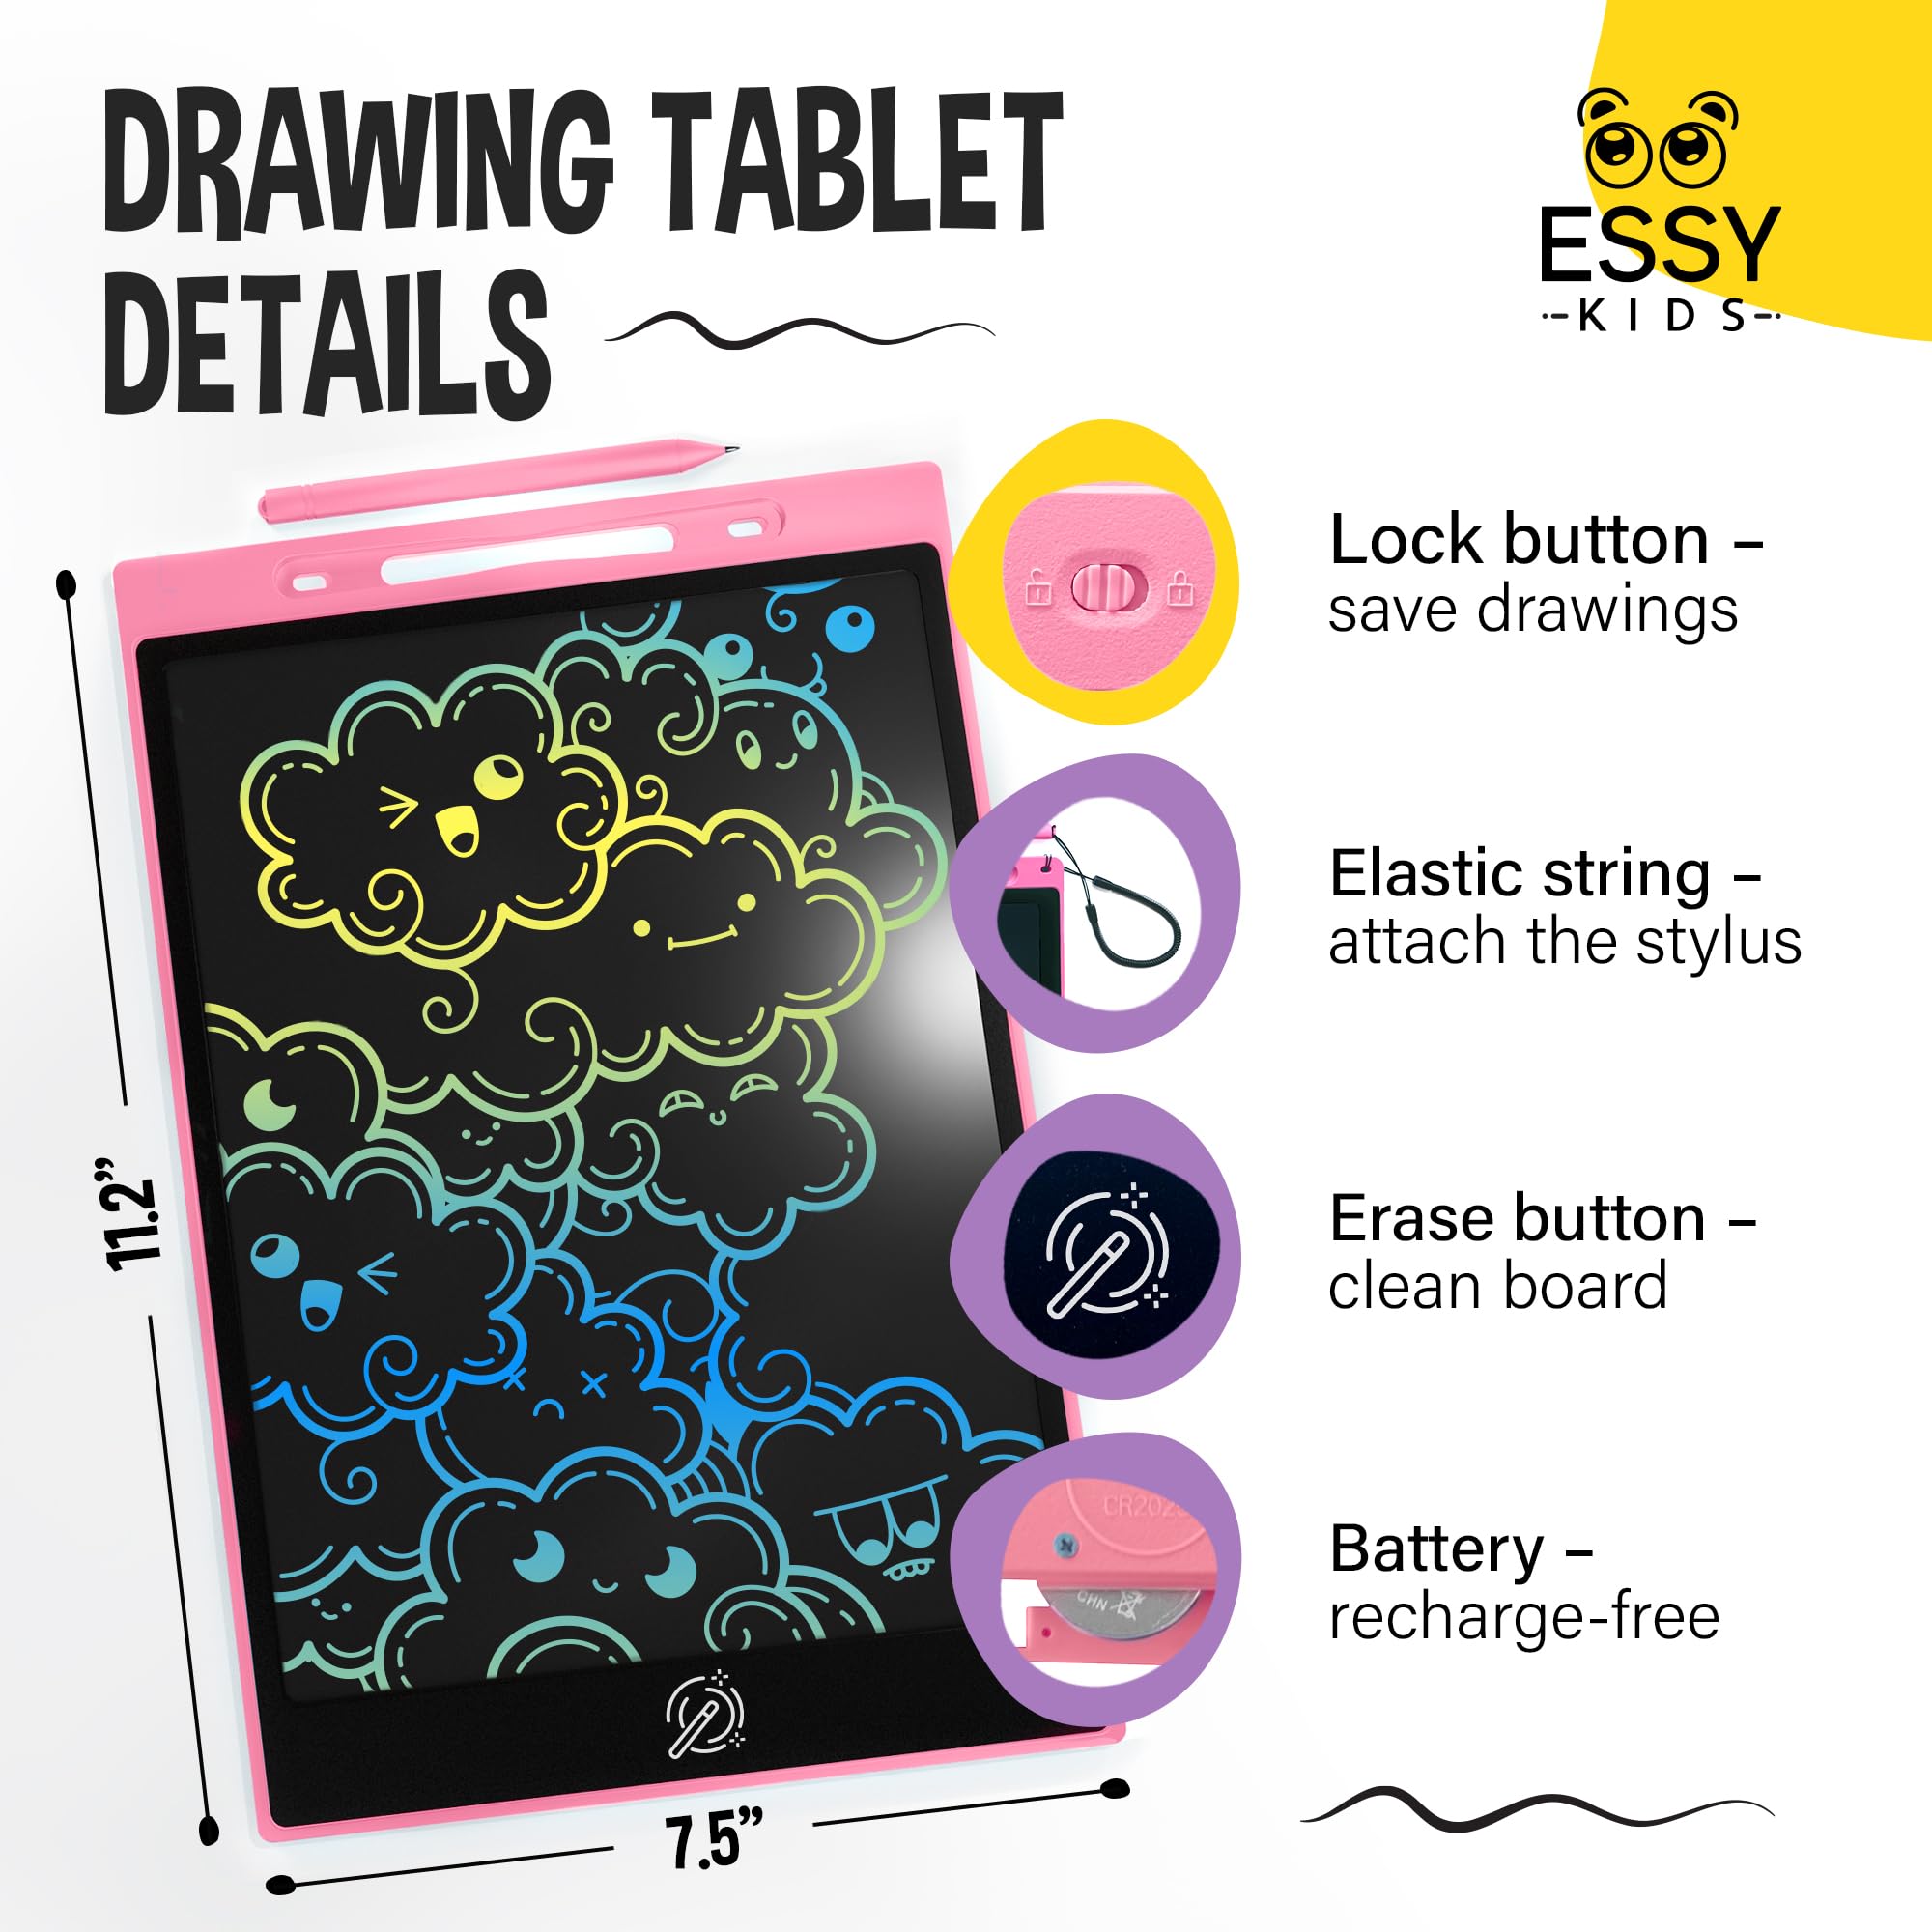 Essy Kids 12“ LCD Writing Tablet for Kids Drawing Tablet Kids Writing Tablet LCD Drawing Tablet for Kids Toddler Writing Tablet Kids Drawing Board